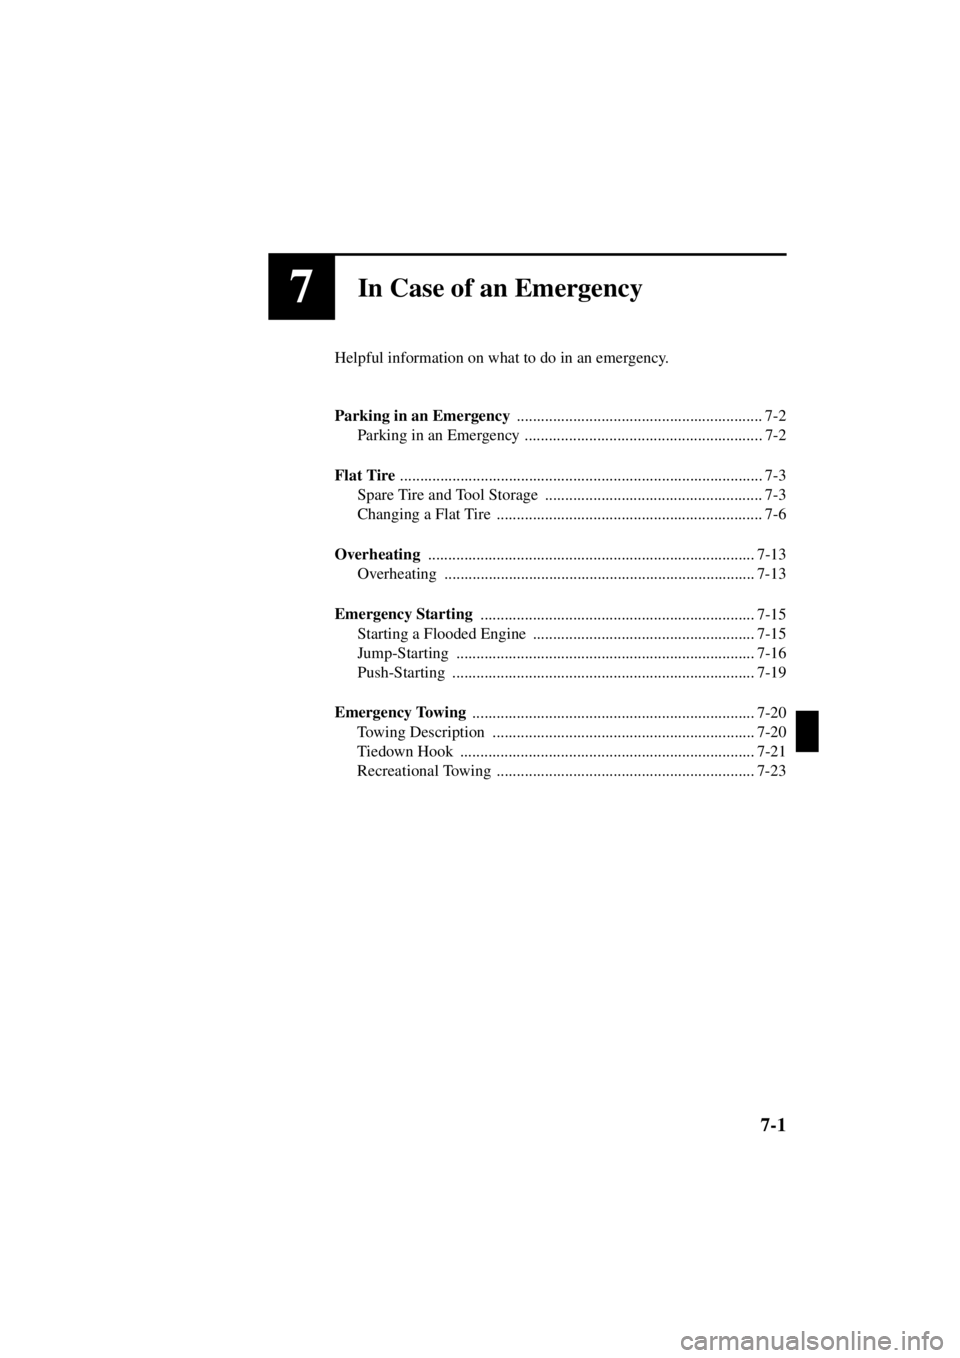 MAZDA MODEL 3 5-DOOR 2004  Owners Manual 7-1
Form No. 8S18-EA-03I
7In Case of an Emergency
Helpful information on what to do in an emergency.
Parking in an Emergency ............................................................. 7-2
Parking i